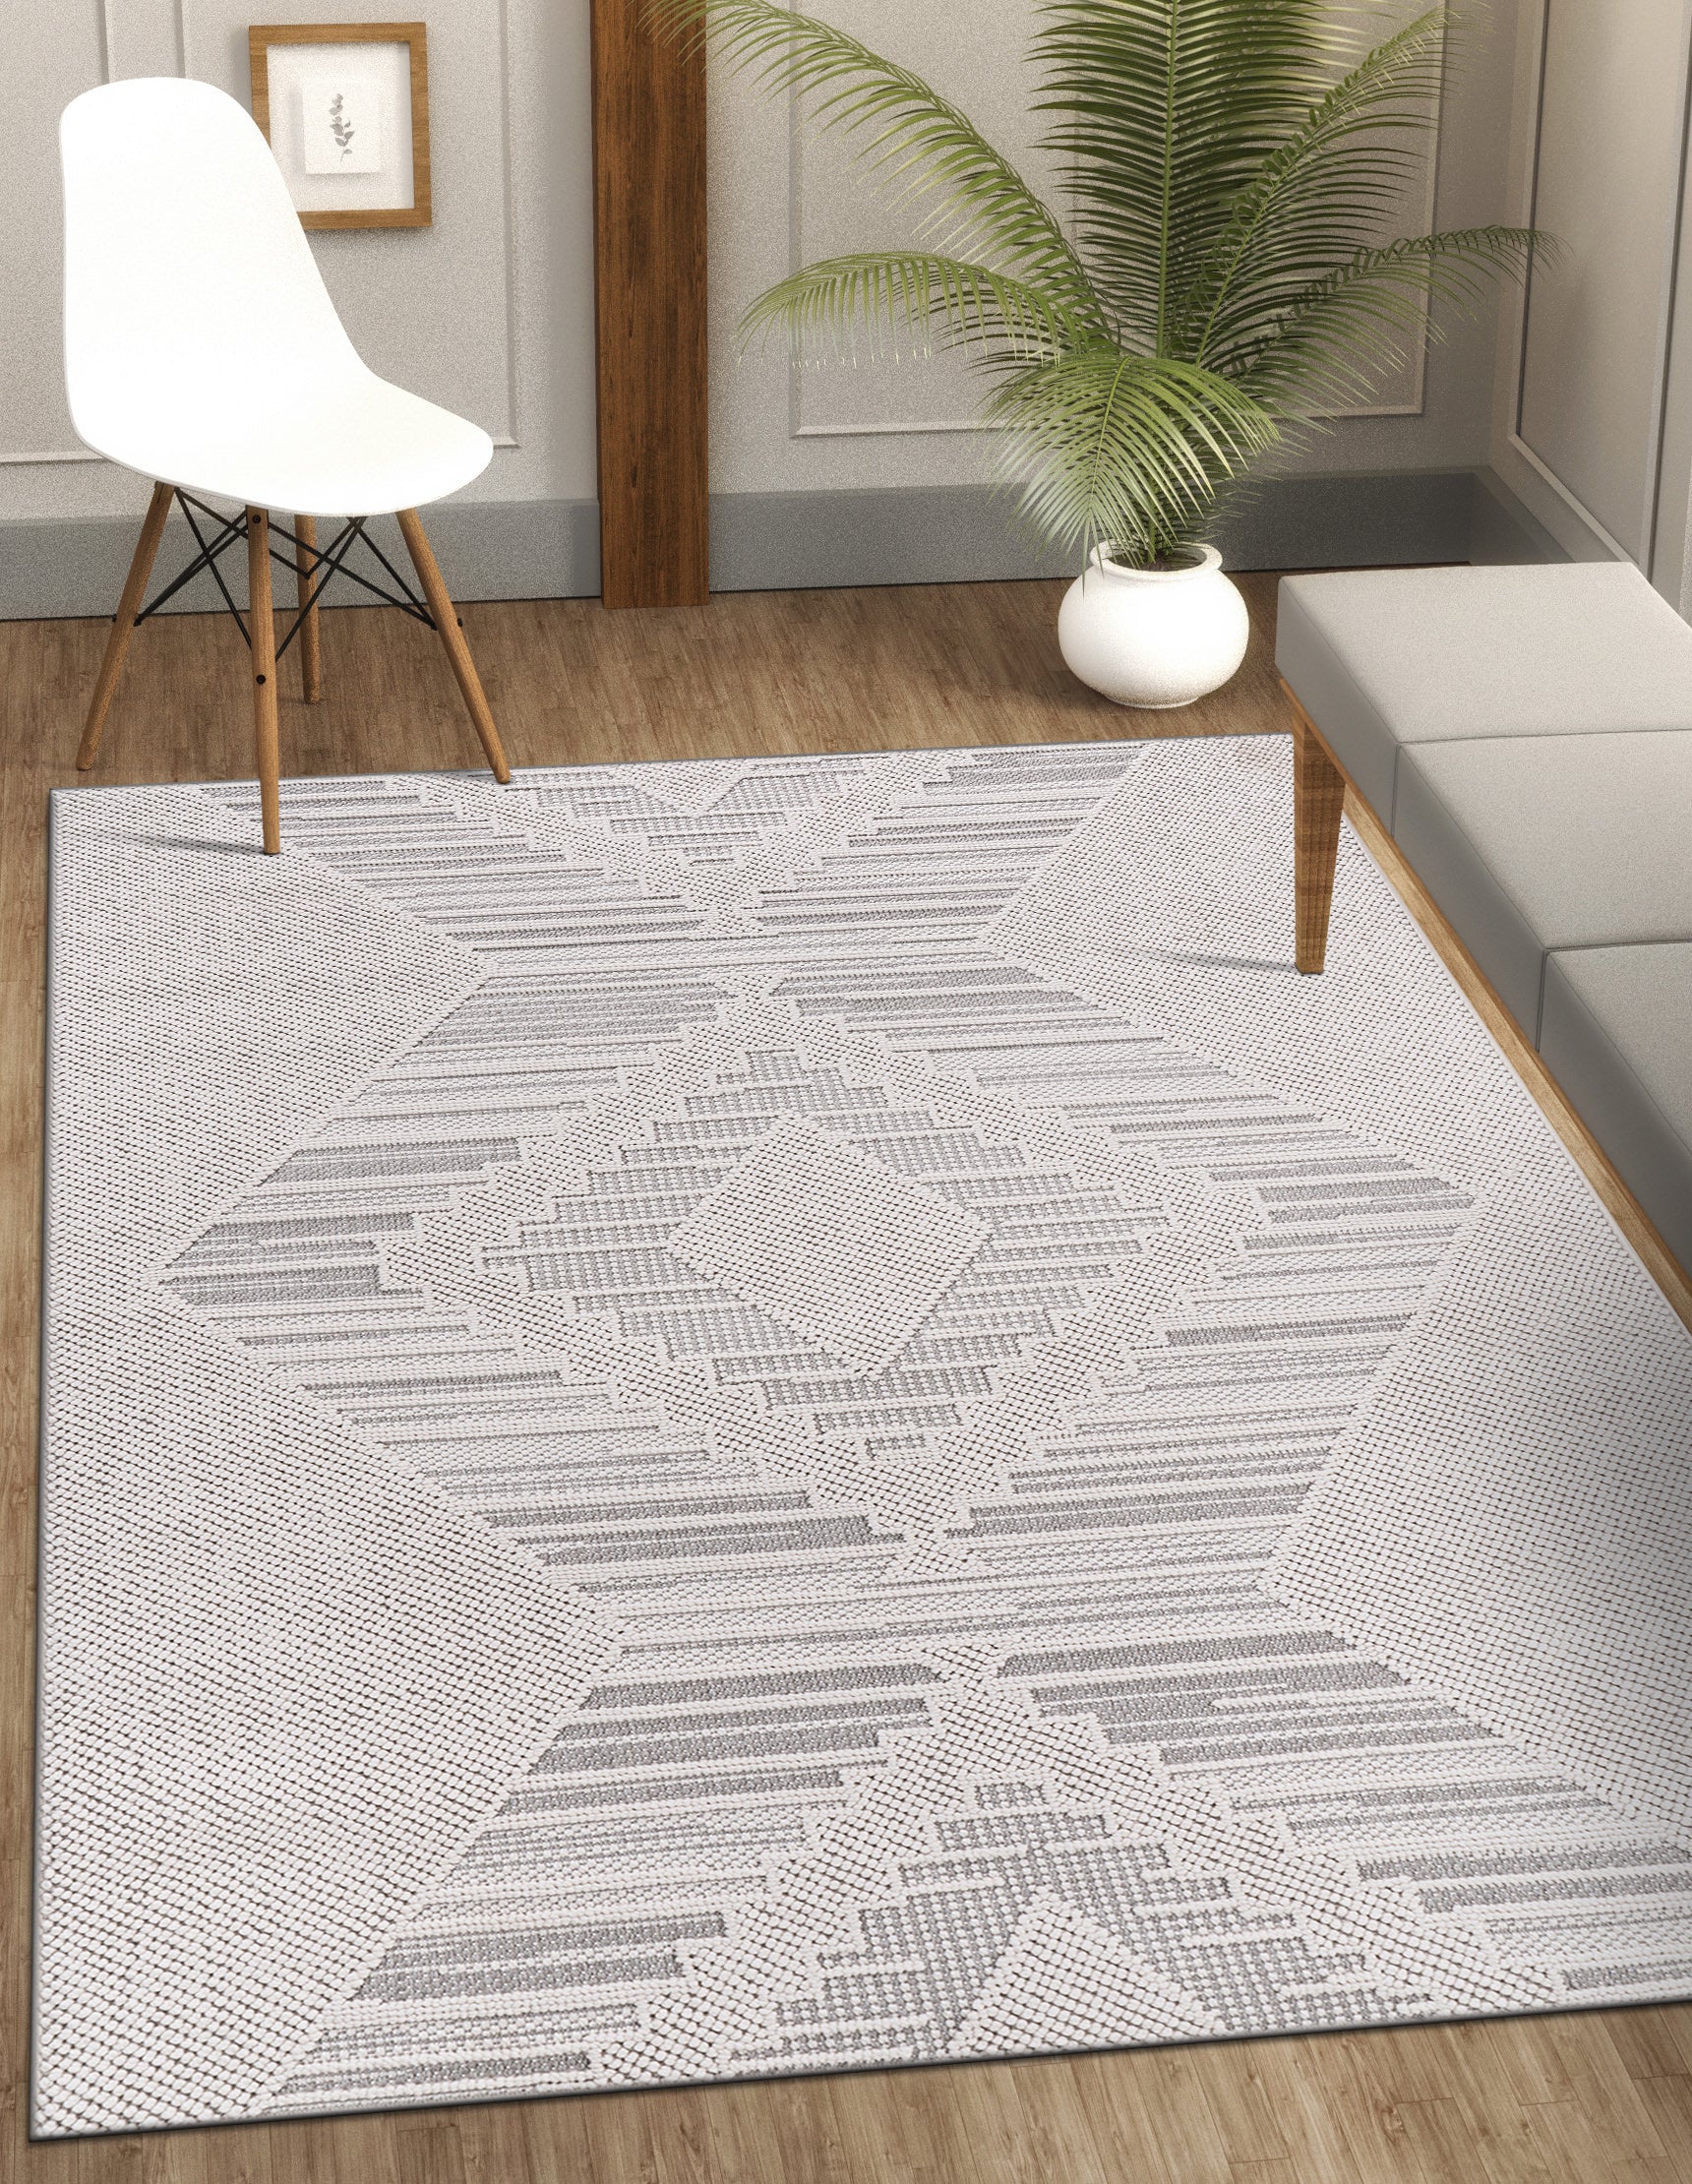 Micro Loop Area Rugs  GY5 - White / Gray